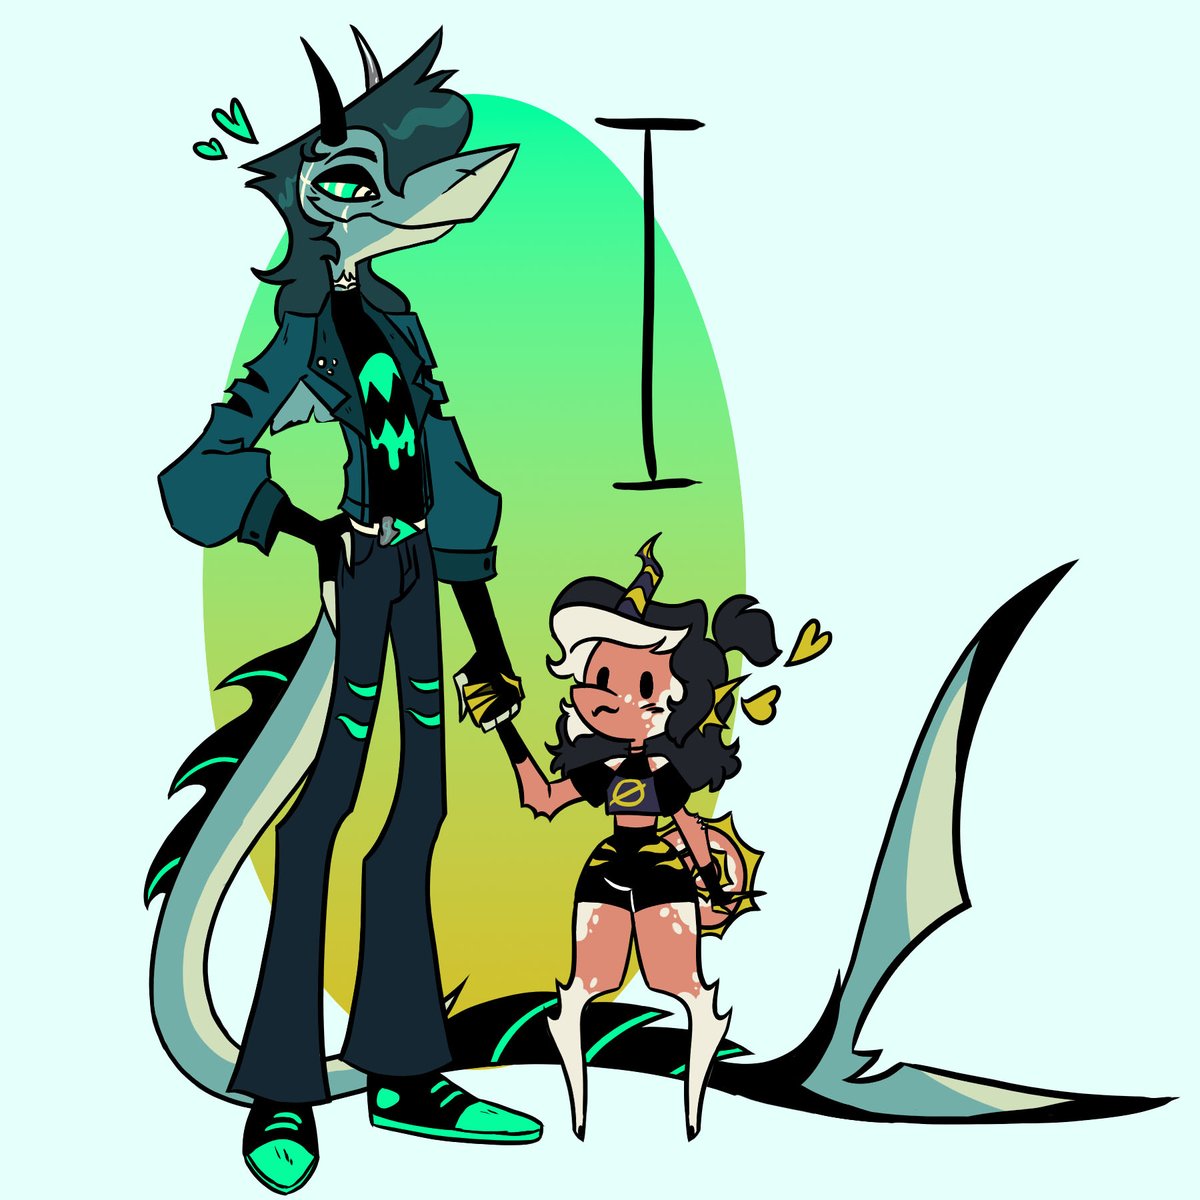 'Much obvious height difference'
ok I lied I made more Chaz XD
#HelluvaBoss #chaz #Chazwickthurman #WhoFanarted #loveshark #impsona